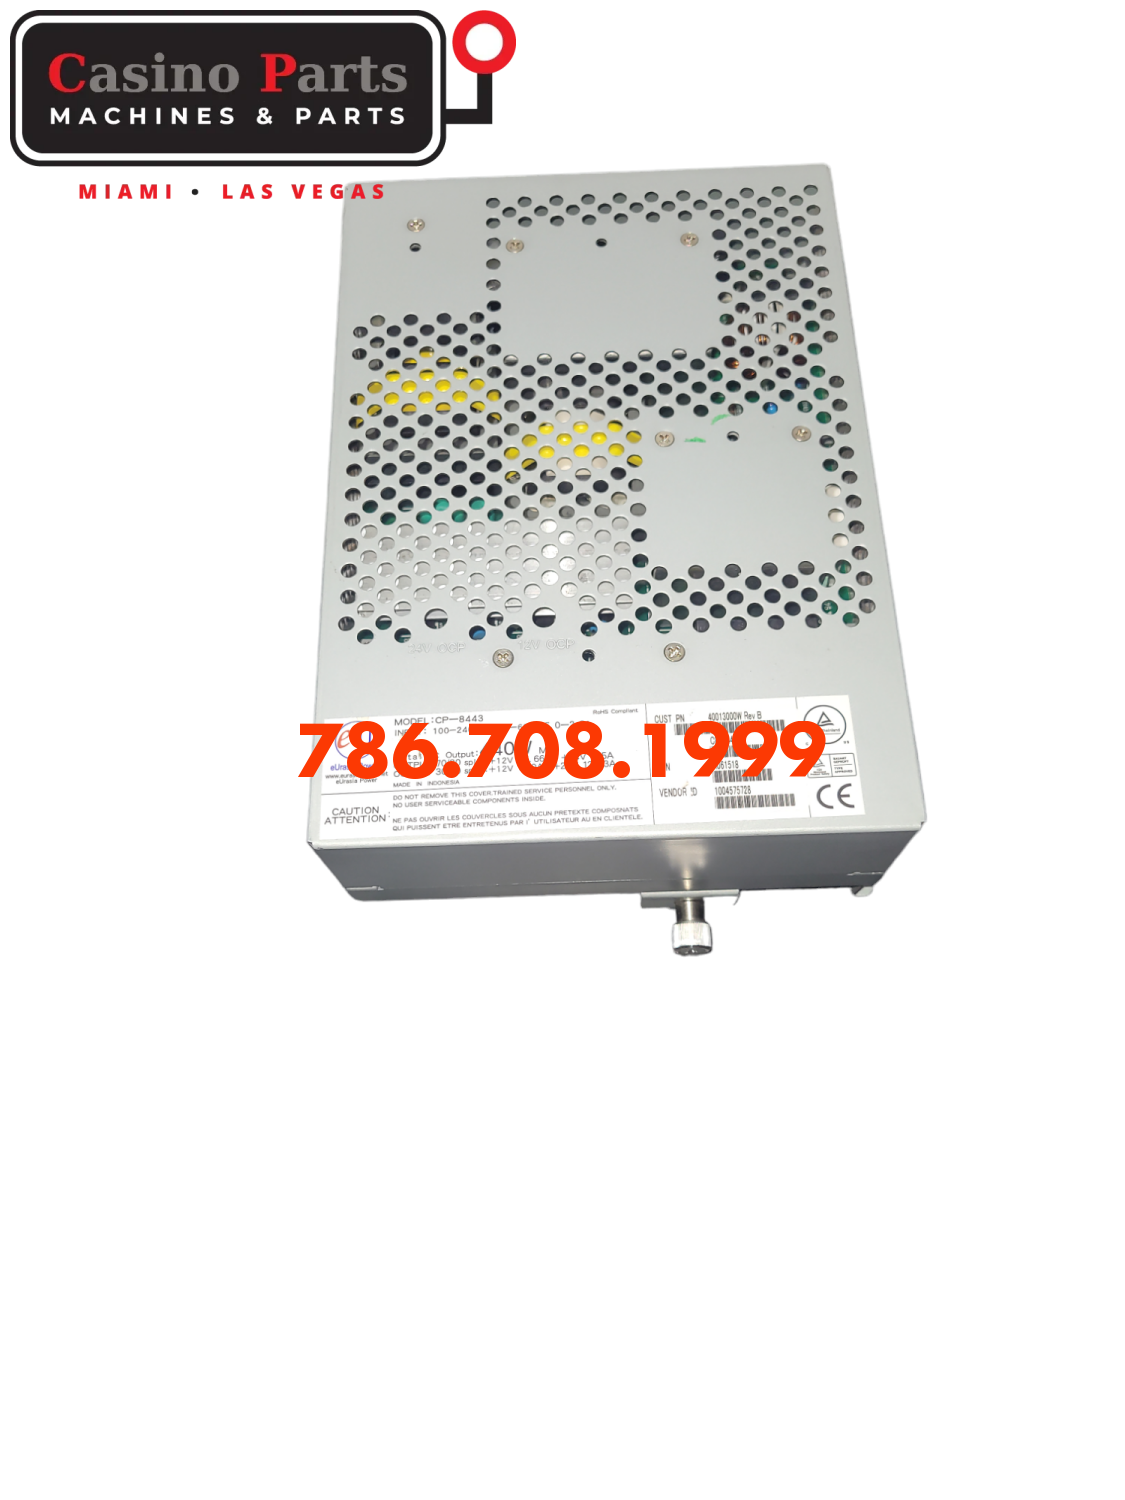 Igt Ultra - Crystal Curve 4D Power Supply 440W Supplies